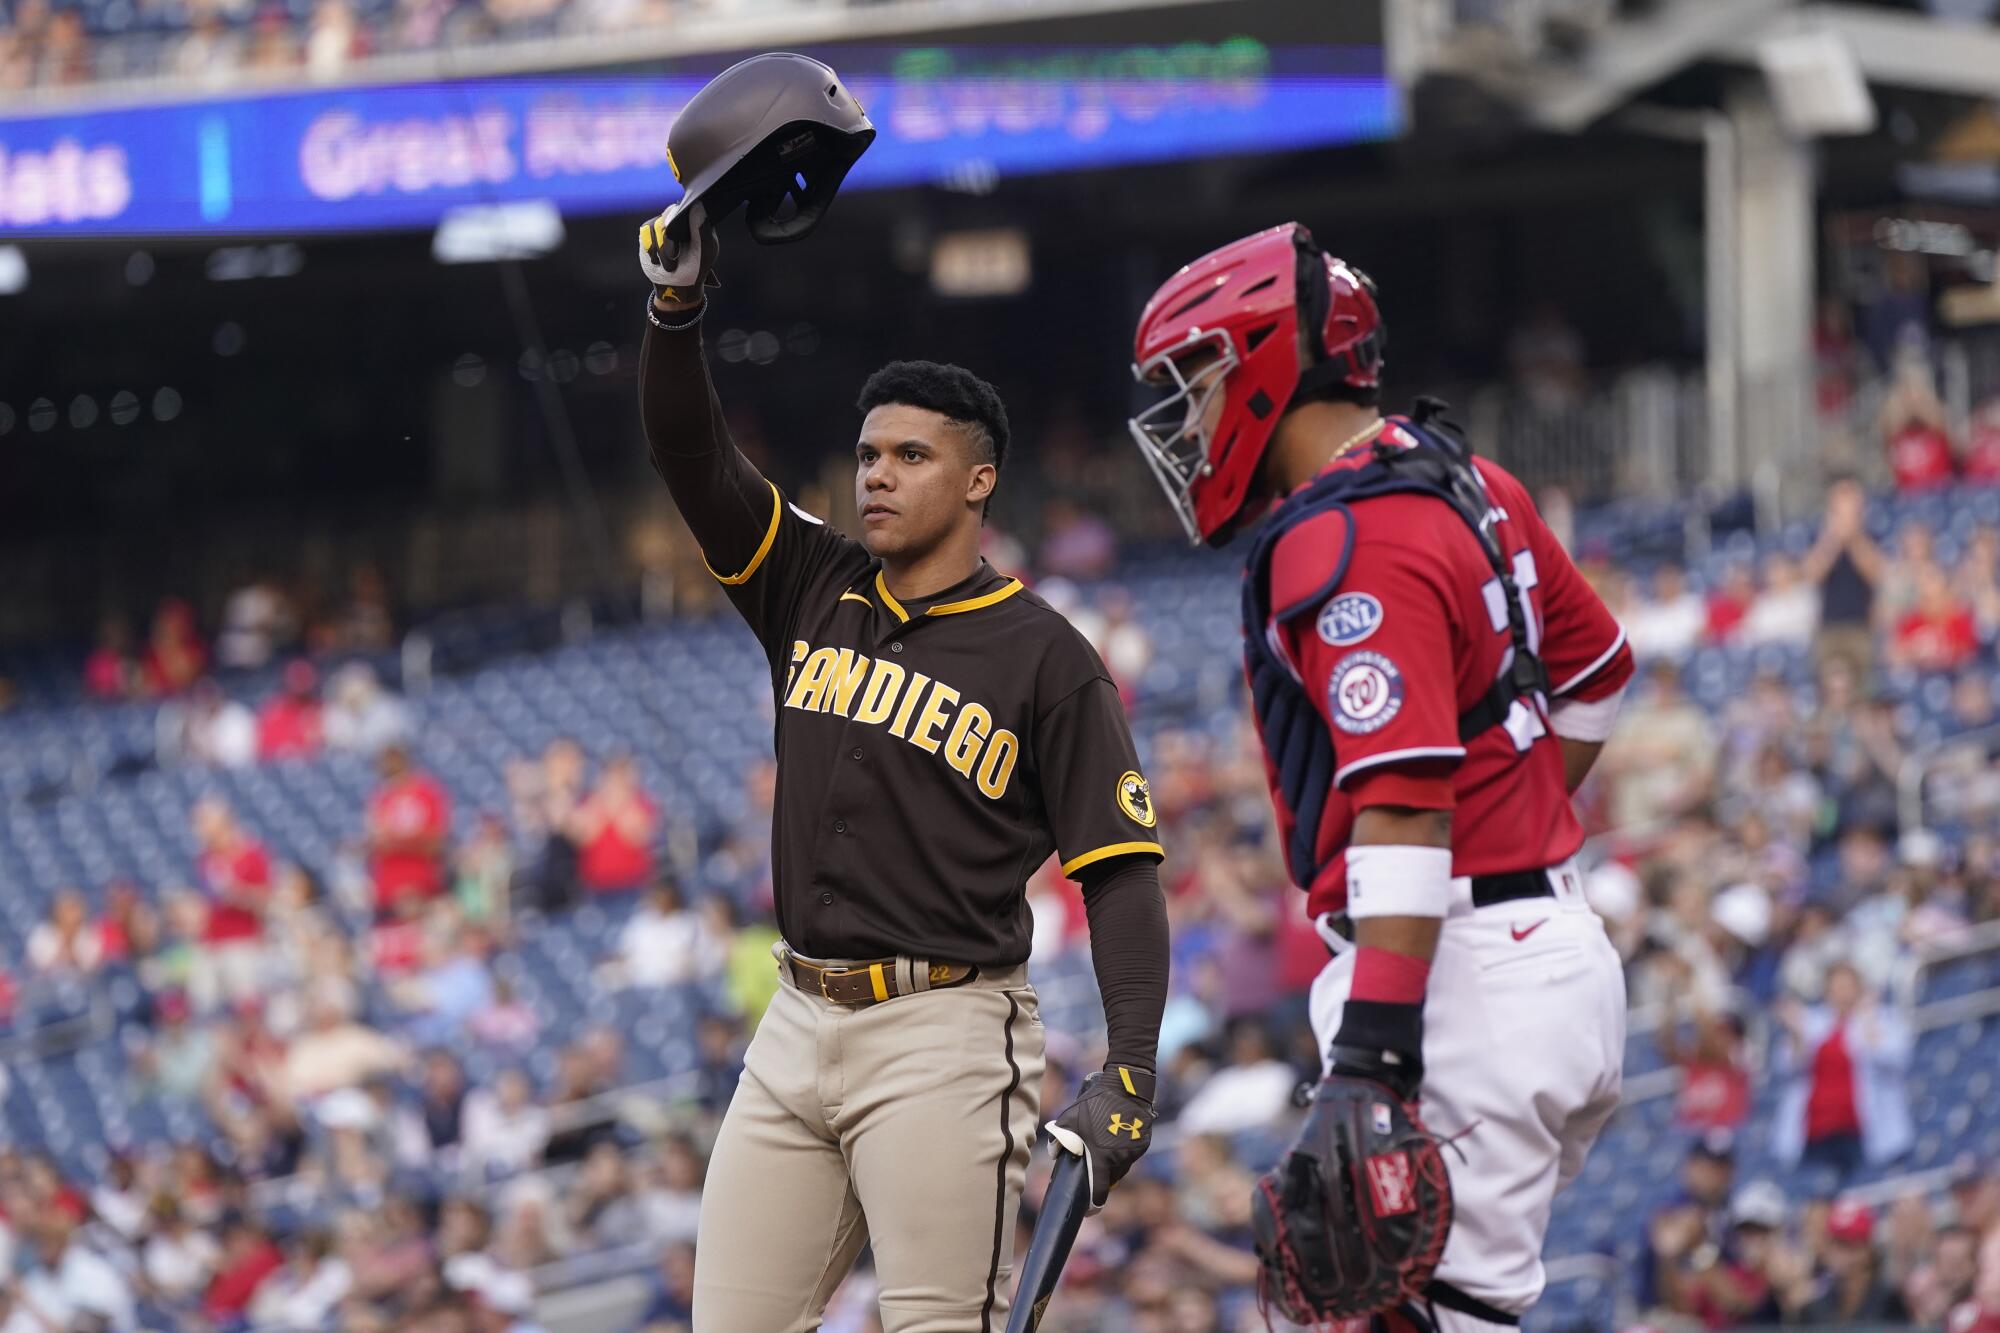 San Diego Padres 2019 season preview: Future is bright with